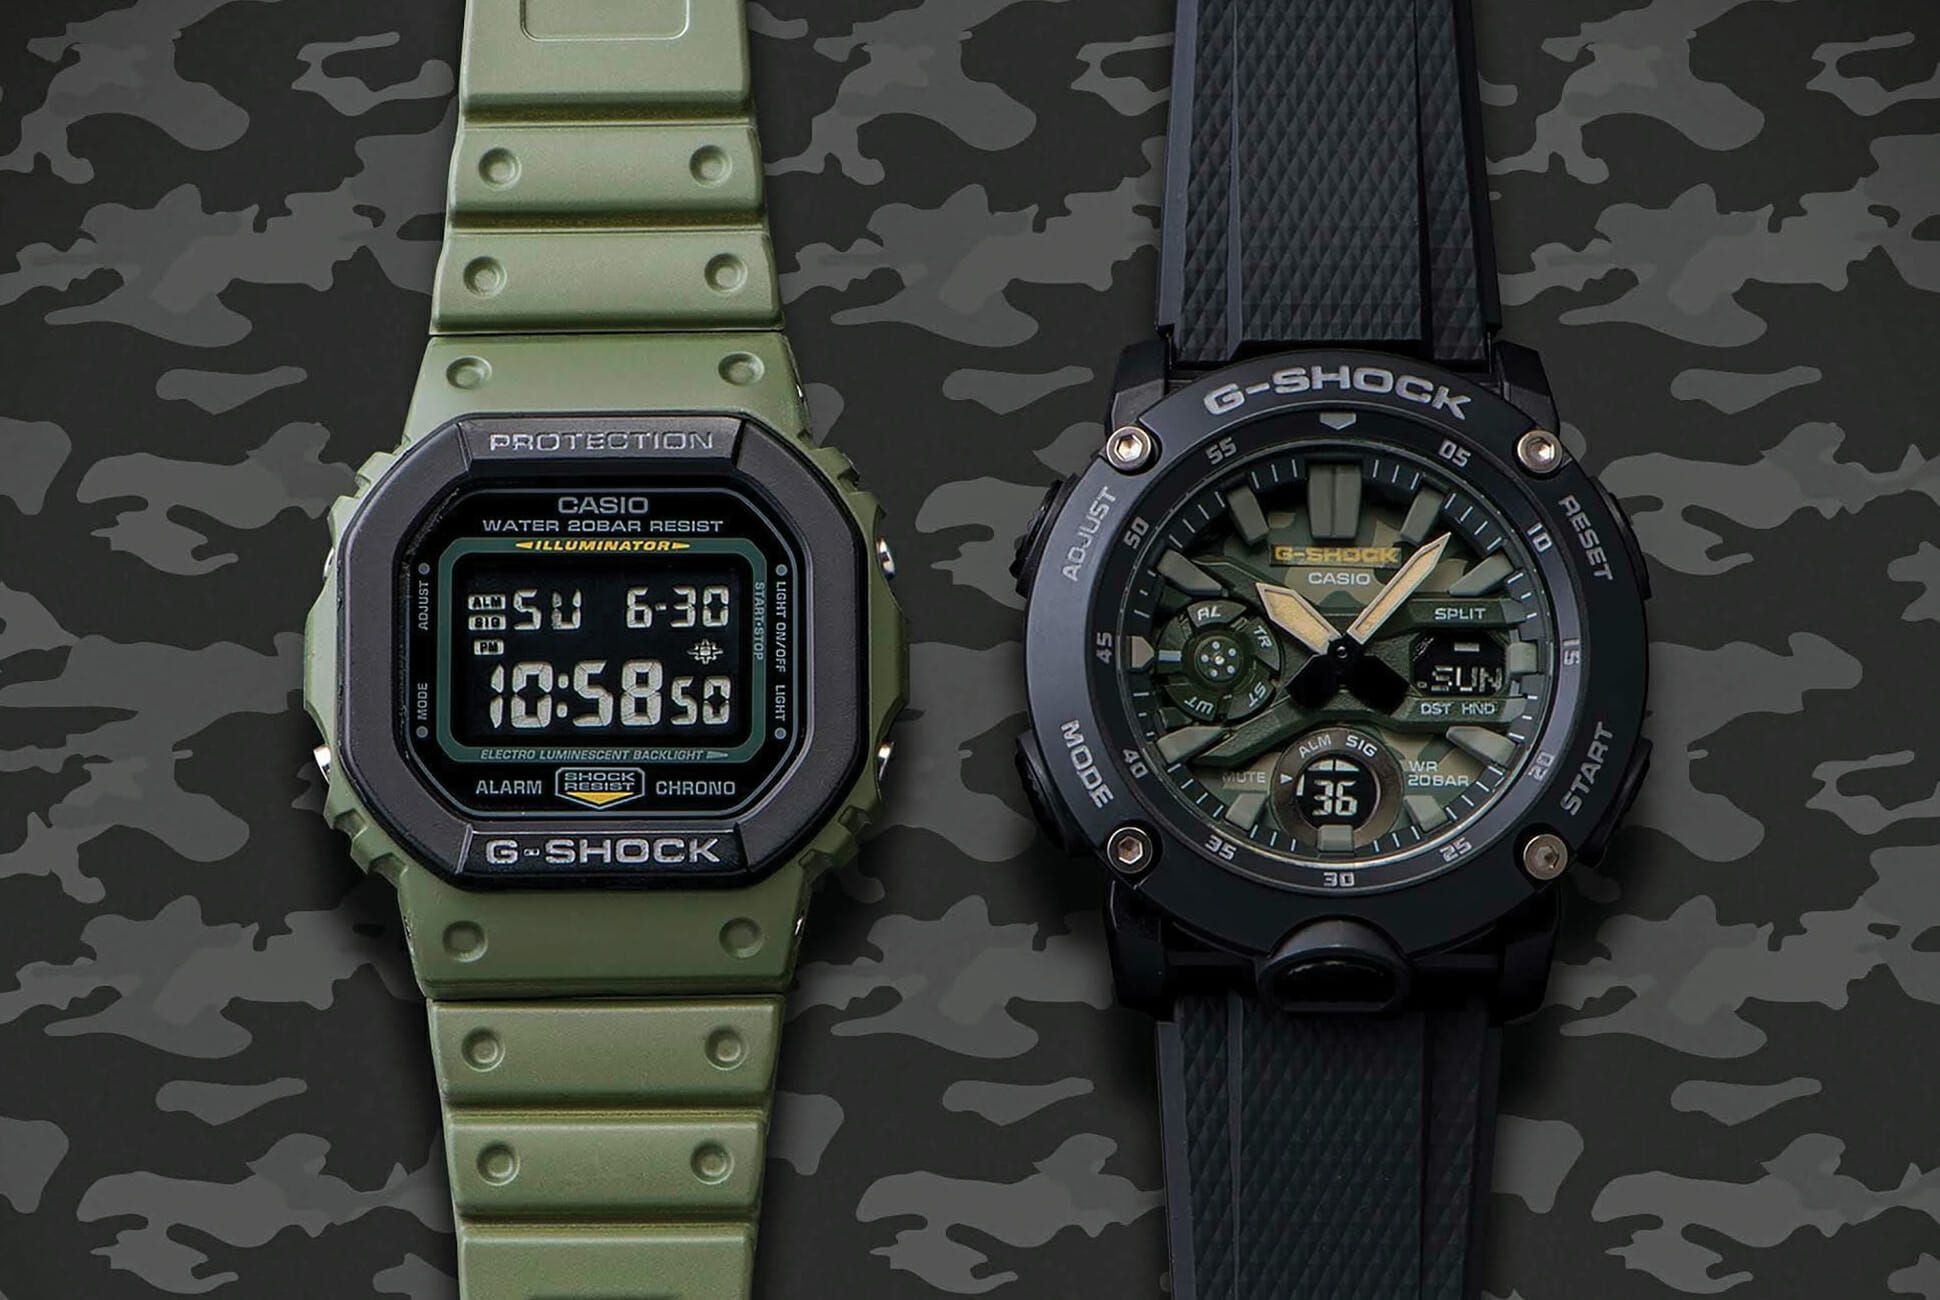 These New G-Shock Watches Have Been Given Full-On Military Treatment